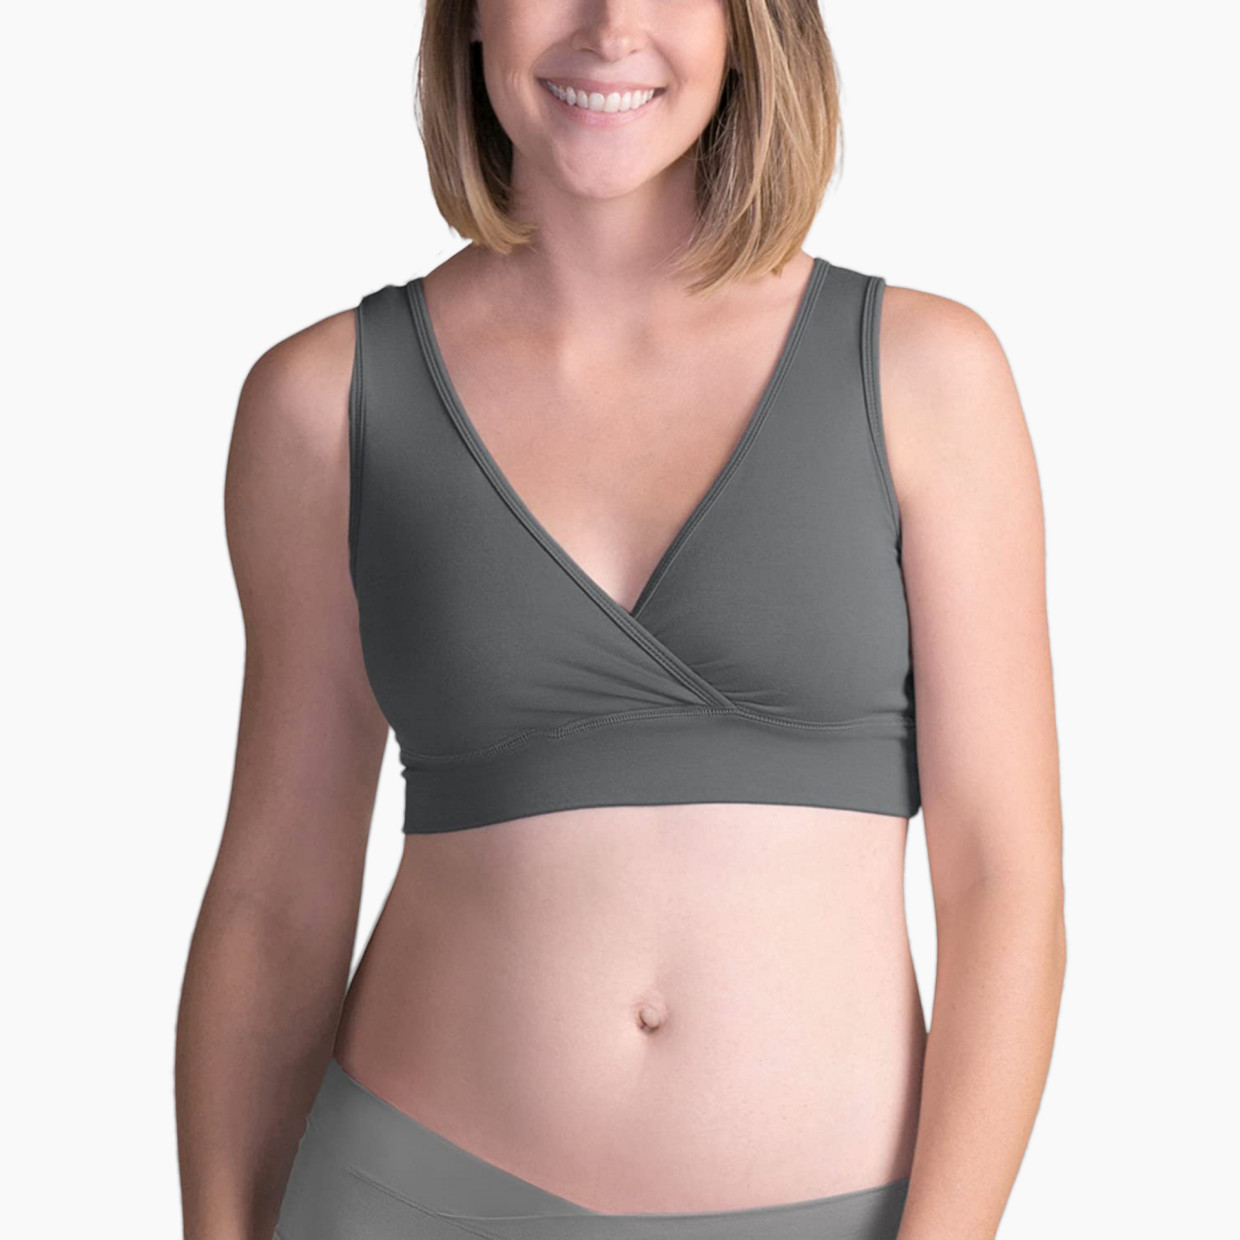 Finding the Perfect Nursing Bra Fit: Measure Before Ordering – Kindred  Bravely